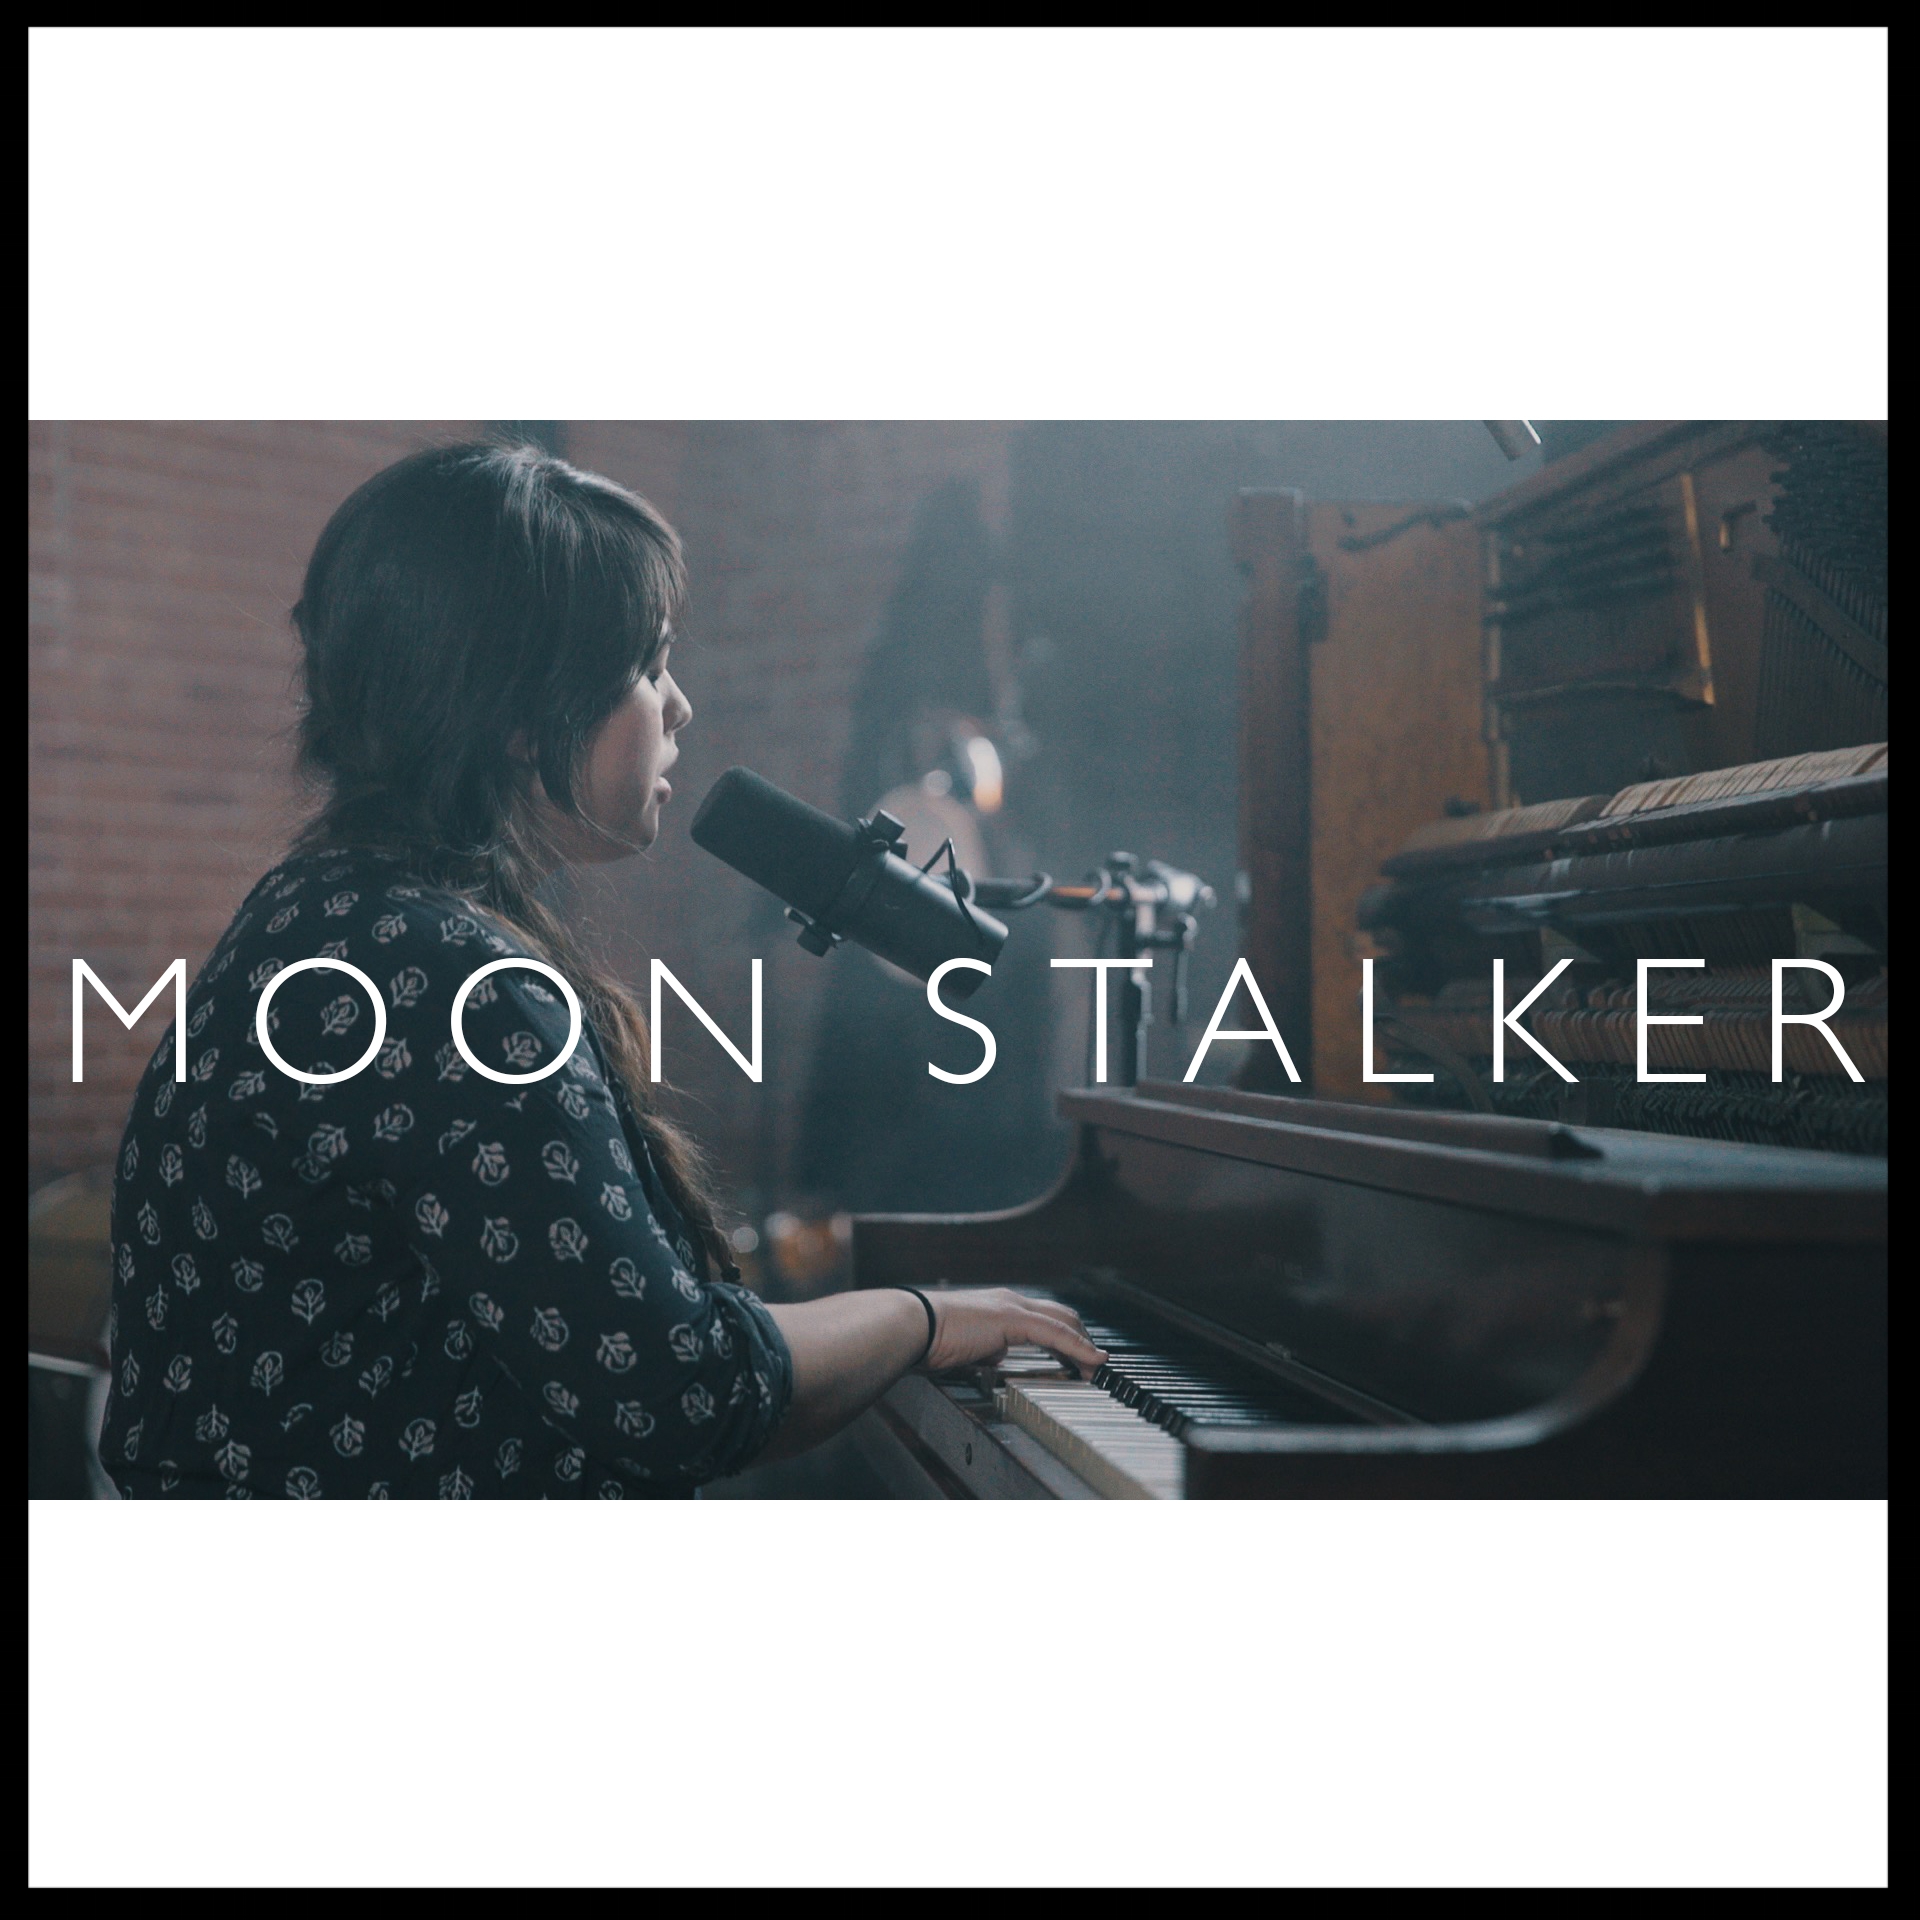 Moon Stalker (Live) by Courtney Swain